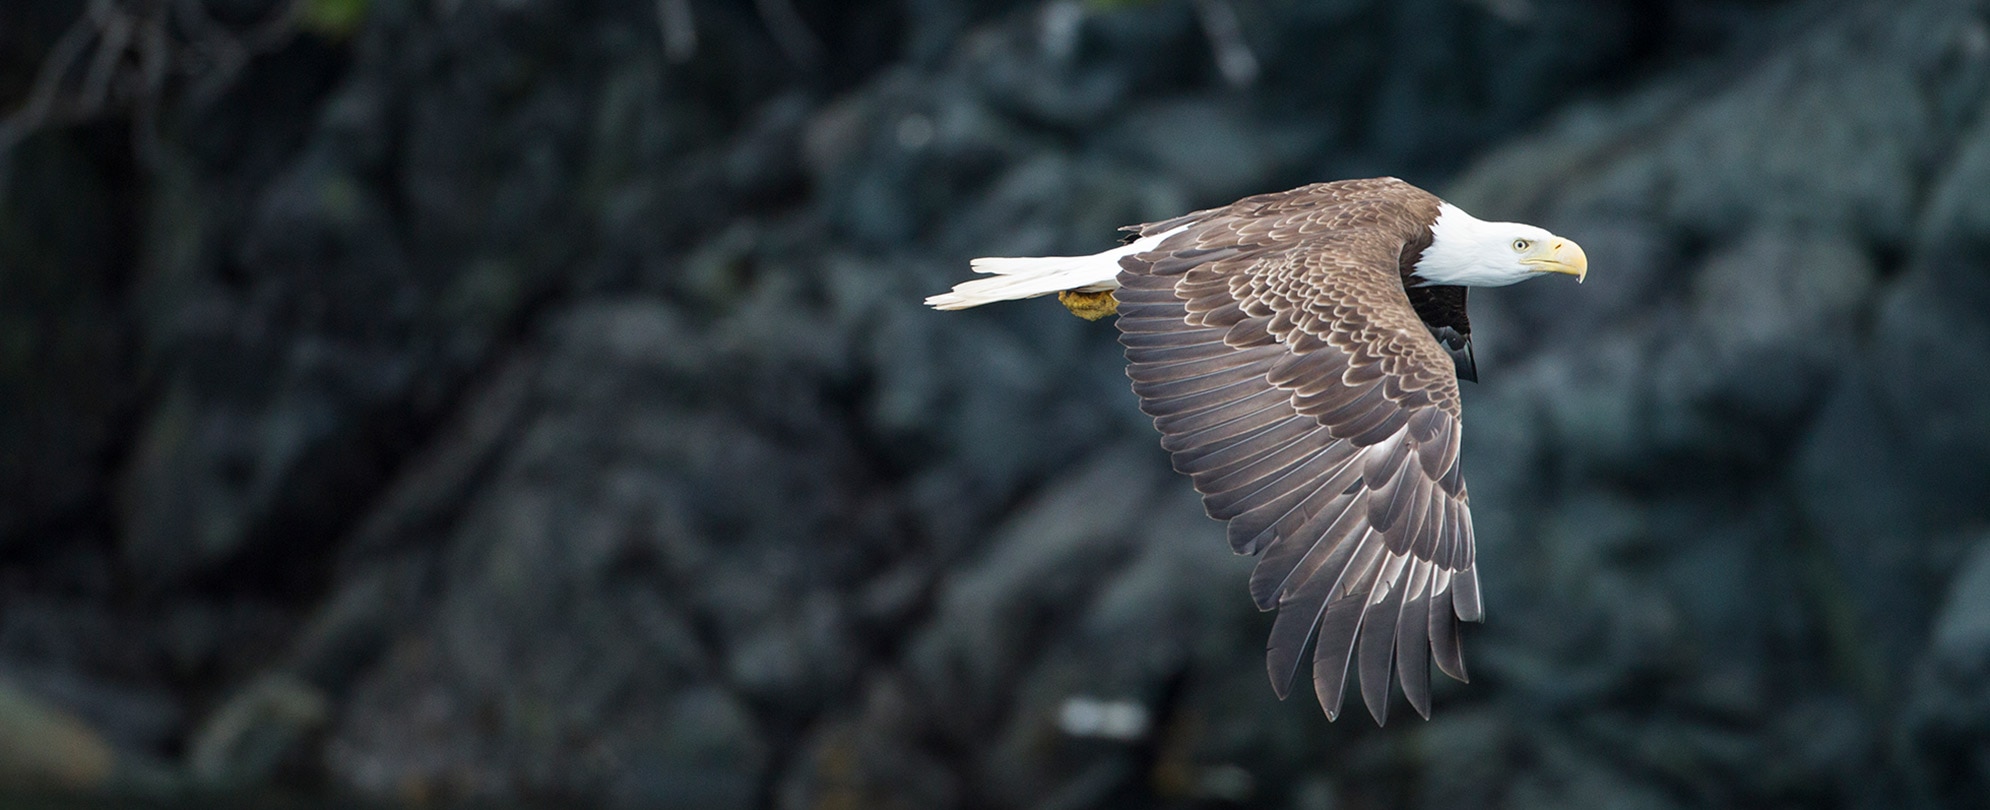 A bald eagle is flying with a rock mountain in the background.